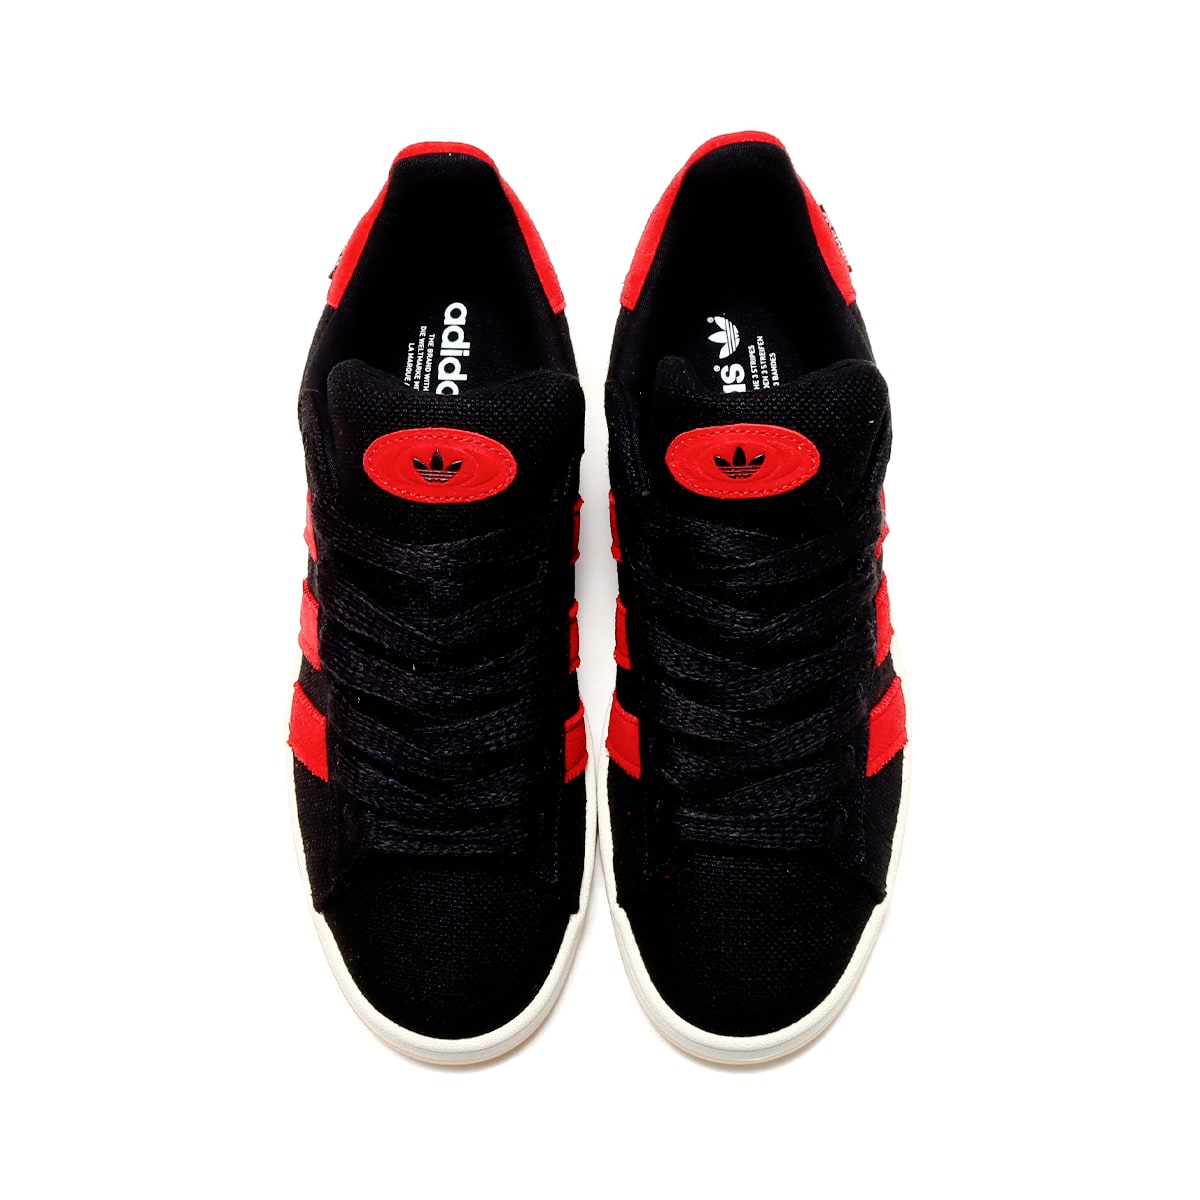 adidas CAMPUS s TKO CORE BLACK/POWER RED/OFF WHITE FW S